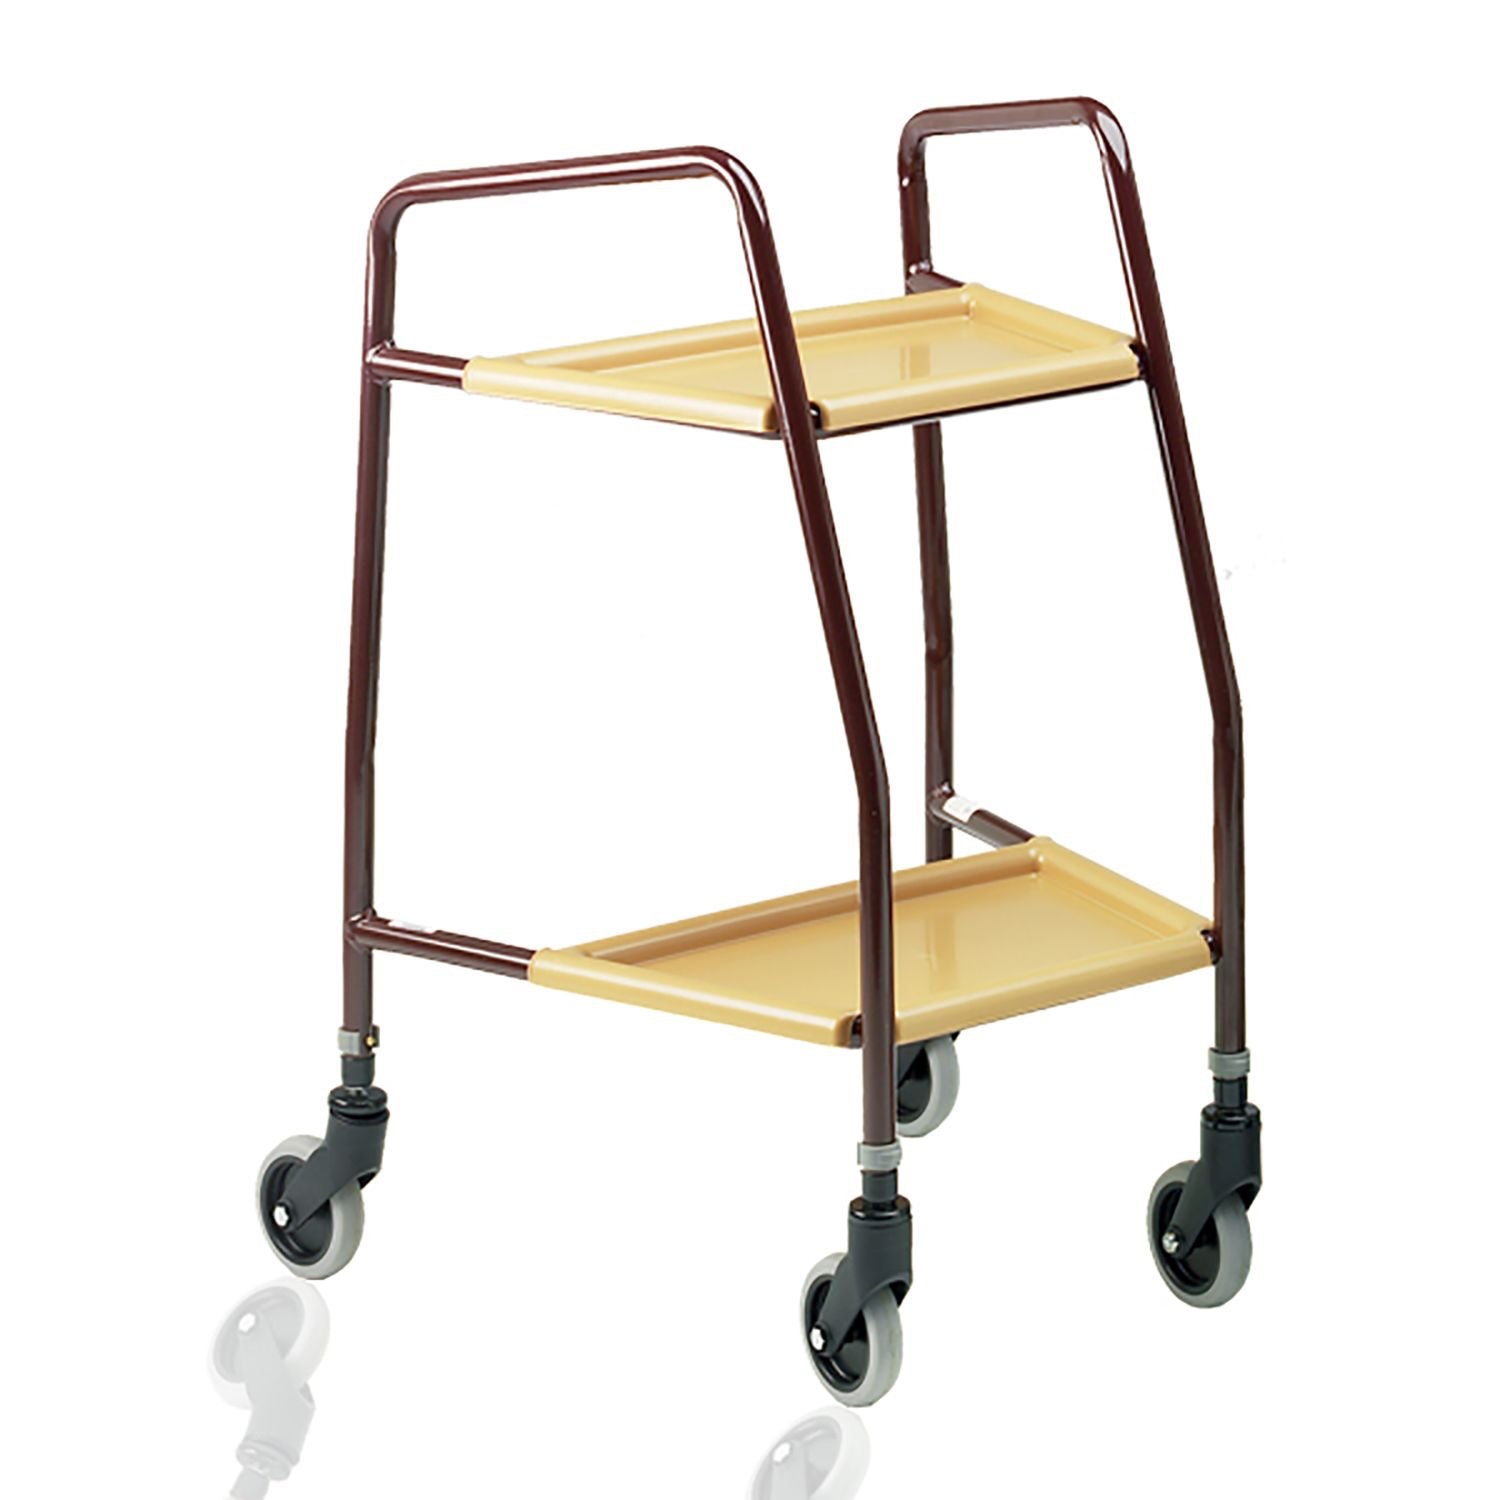 Roma Heigh Adjustable Nesting Trolley With Detachable Plastic Trays